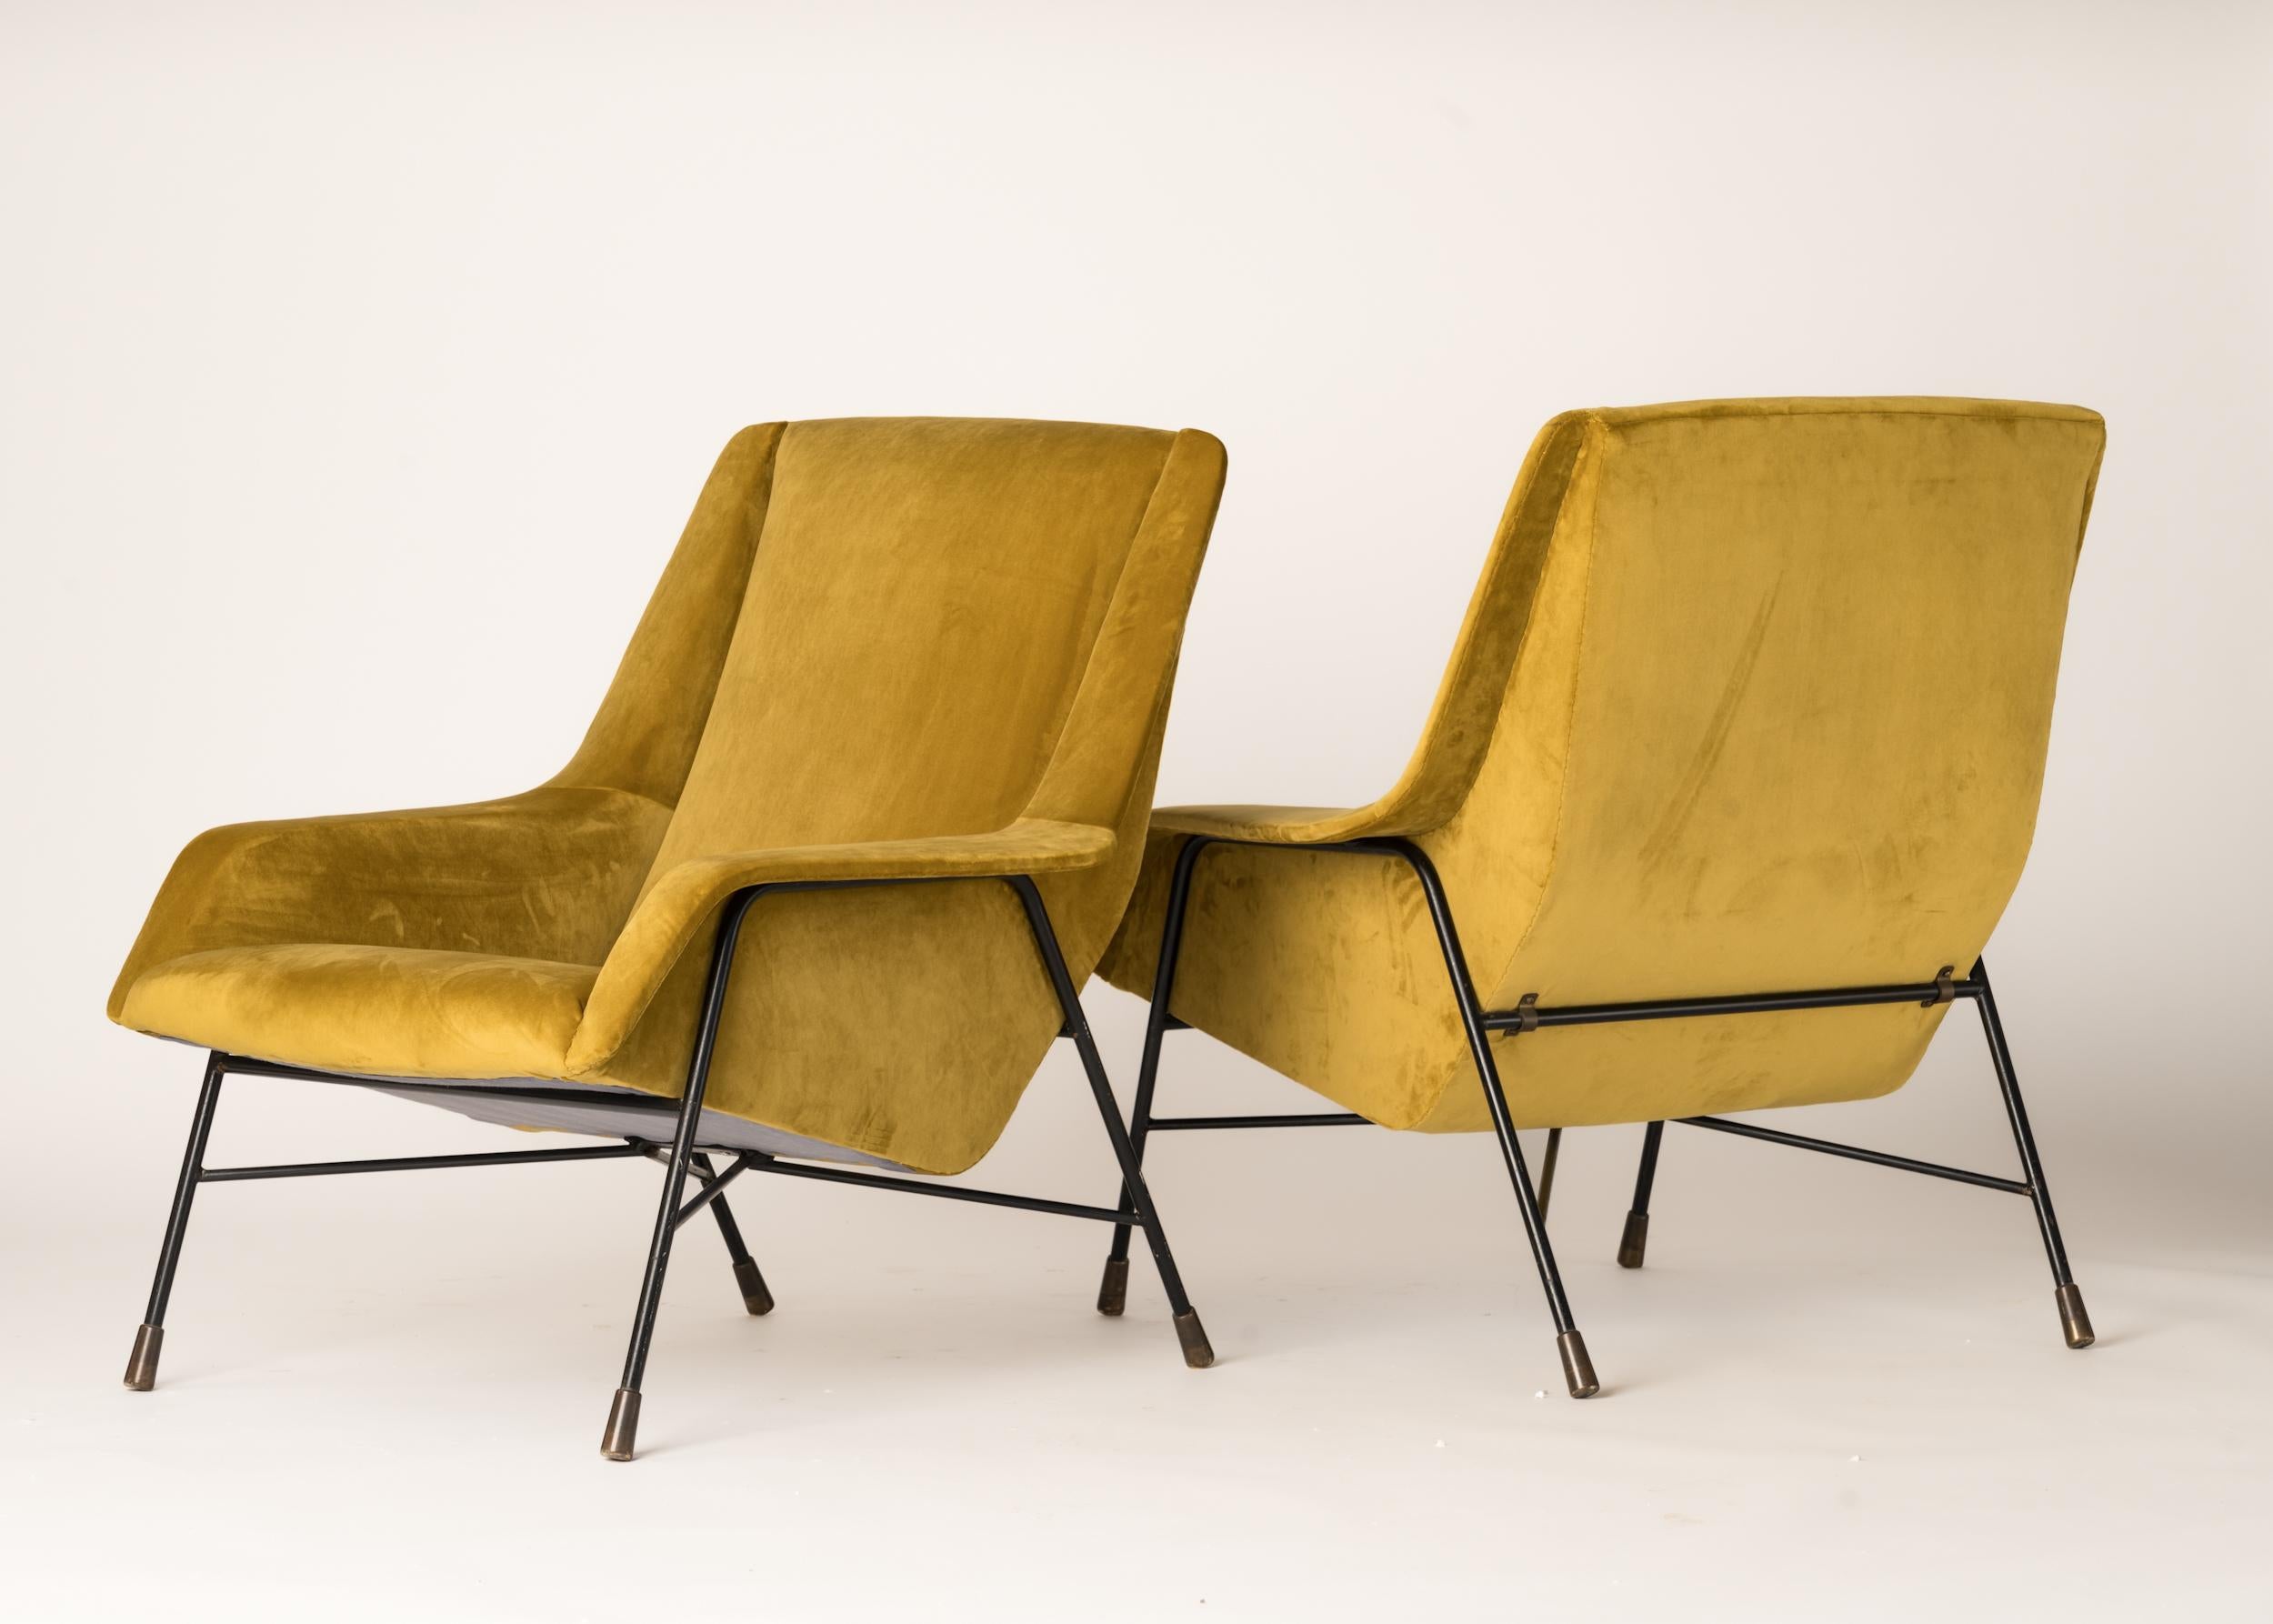 Pair of S12 Armchairs by Alfred Hendrickx for Belform, Belgium, 1958 In Good Condition For Sale In New York, NY